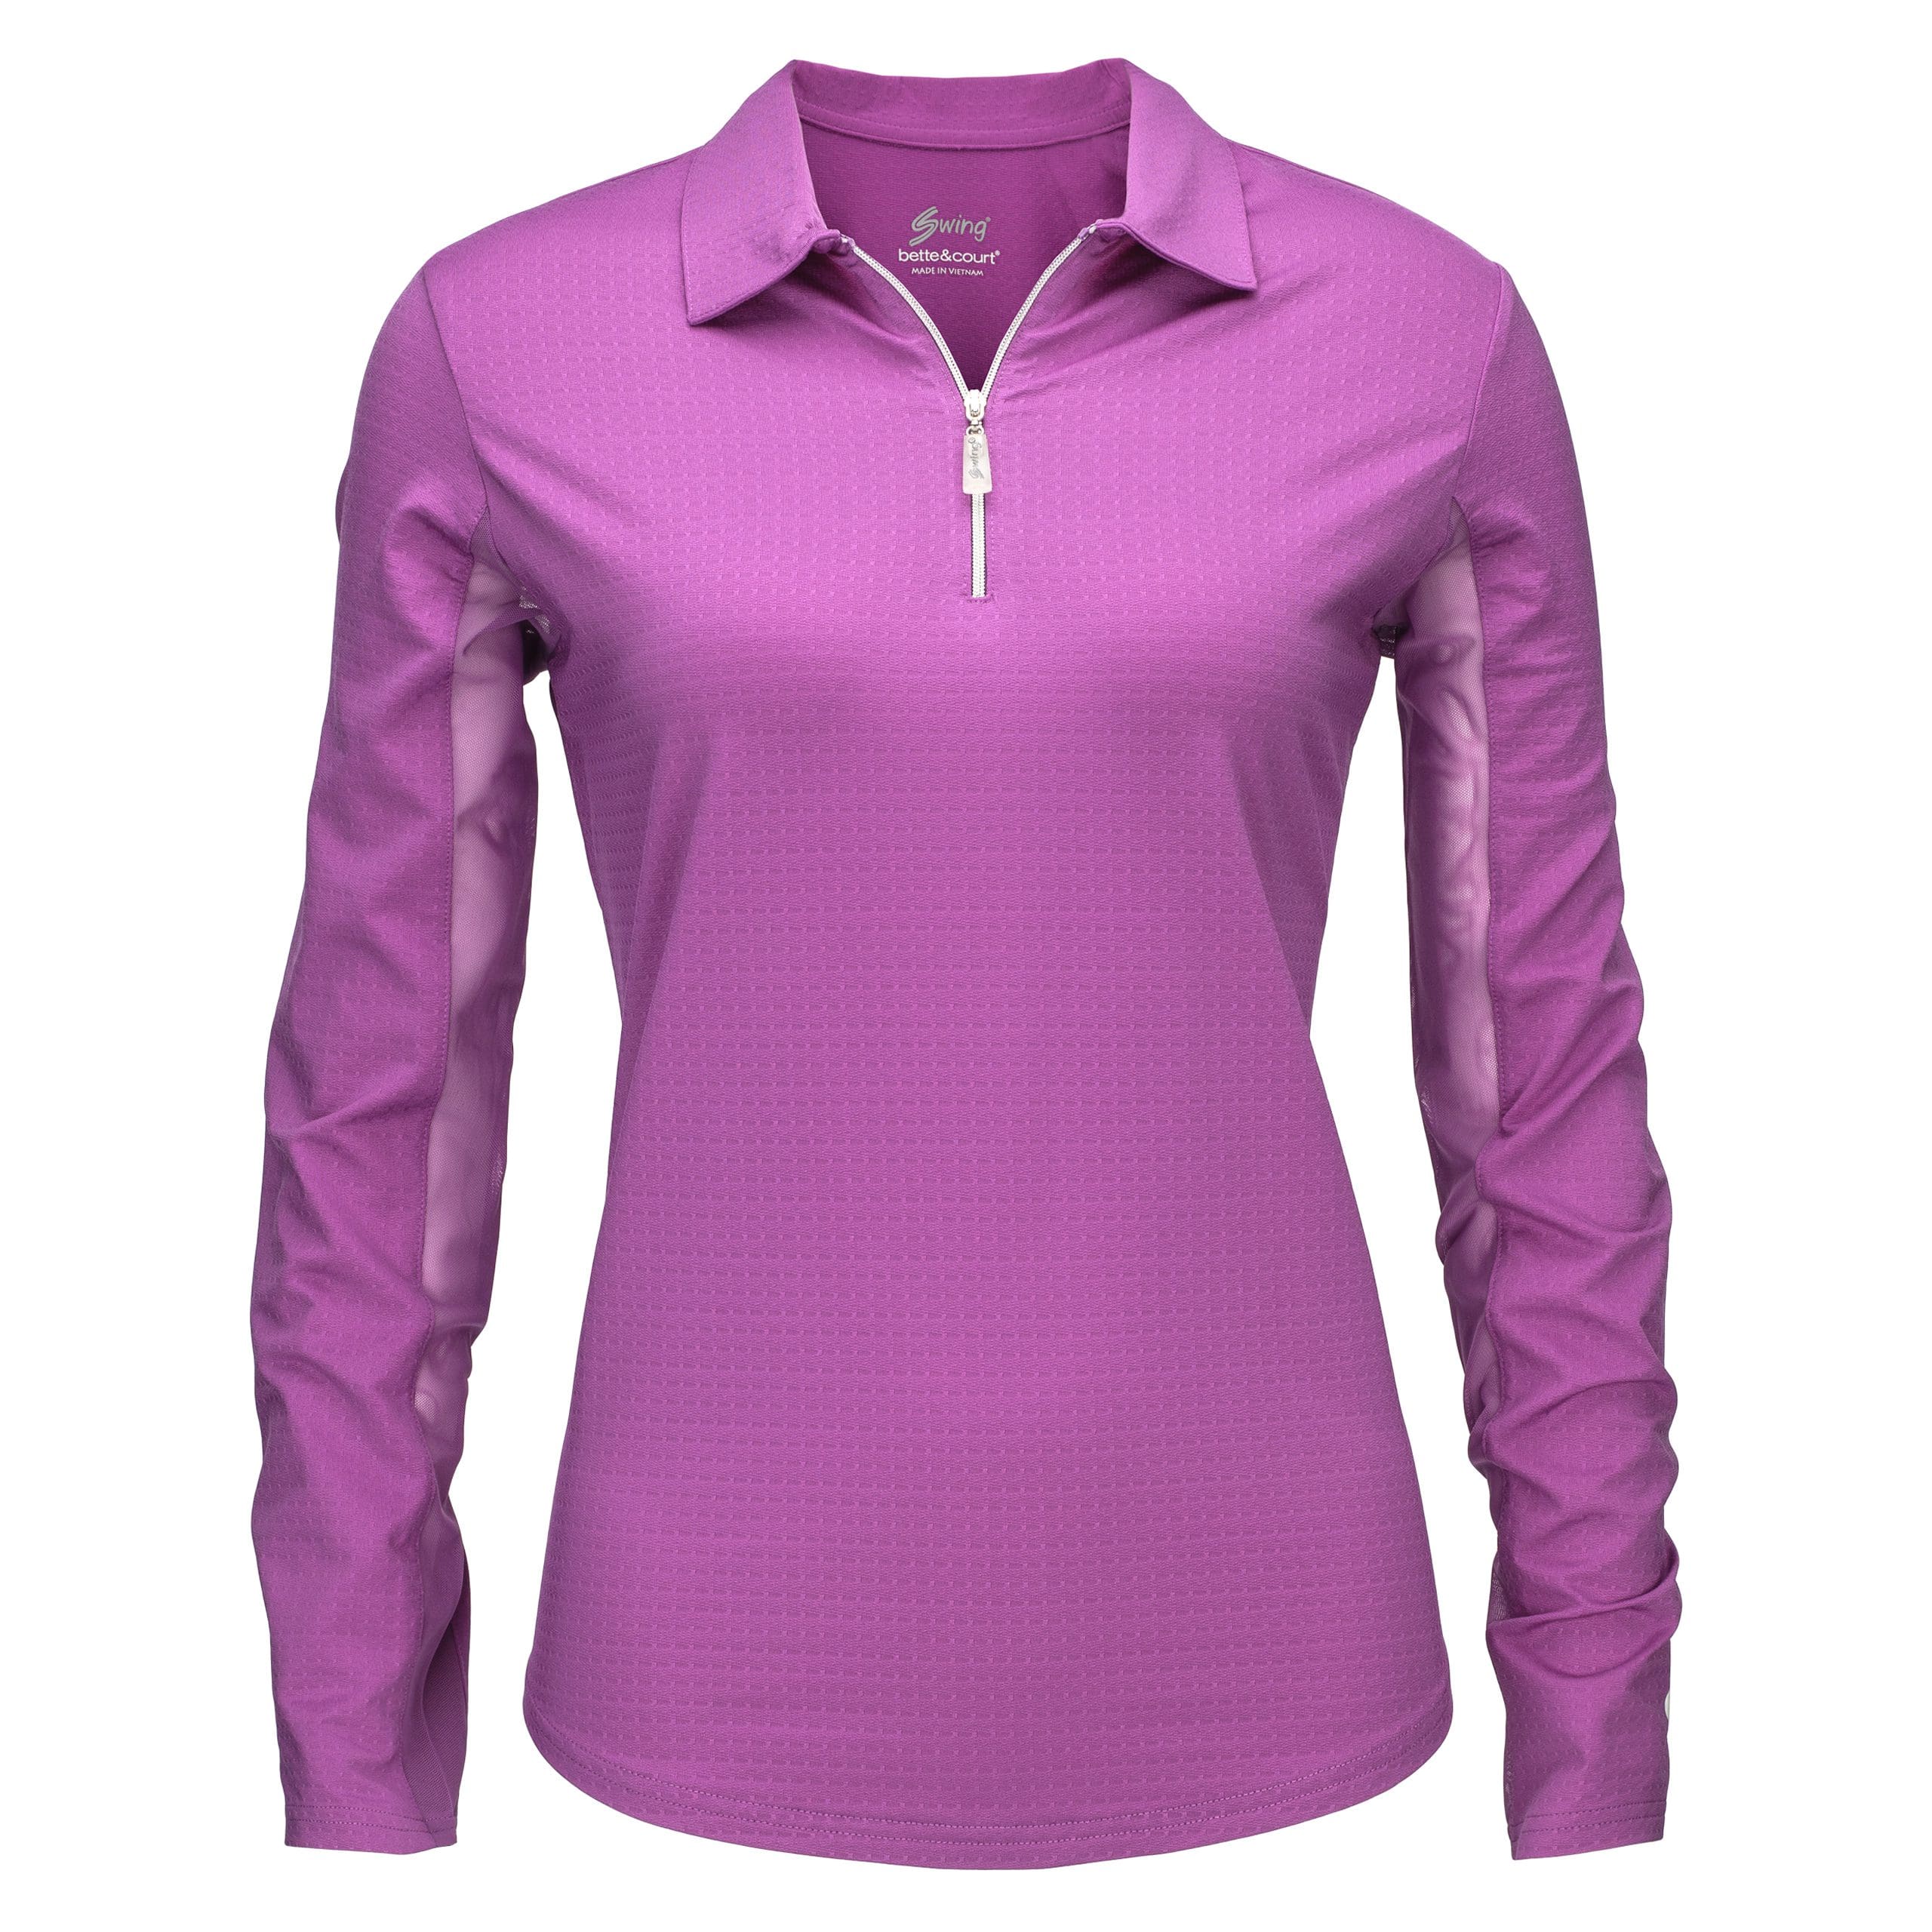 Product photography pricing example. A ghost mannequin photograph showcasing a purple, long sleeve women's golf shirt.